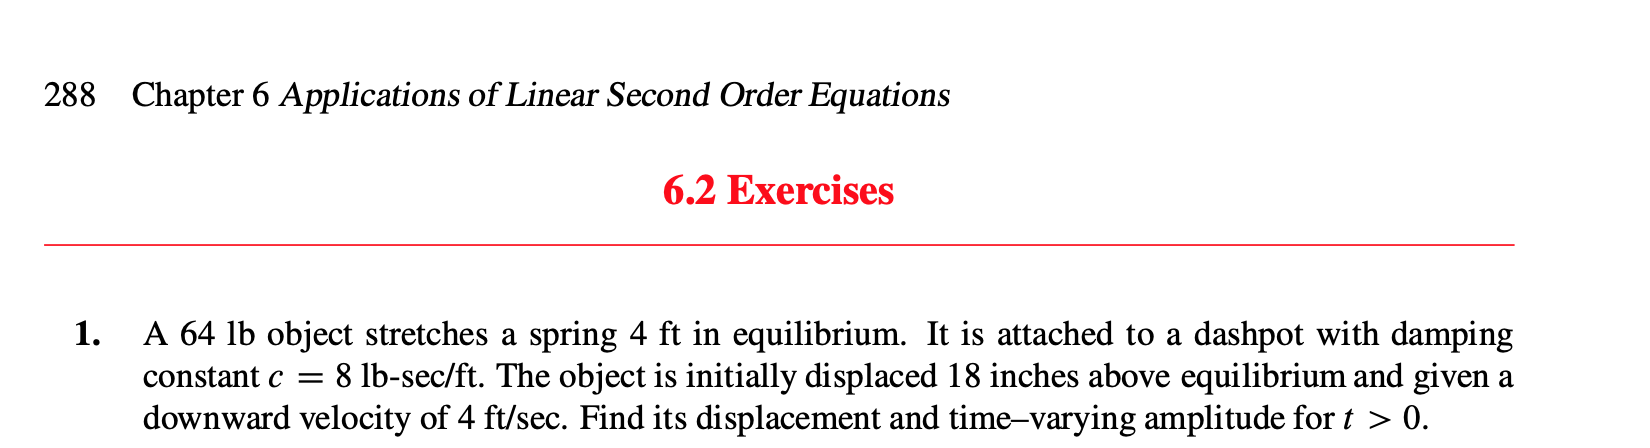 Chapter 6 Applications of Linear Second Order Equations
288
6.2 Exercises
1.
A 64 lb object stretches a spring 4 ft in equilibrium. It is attached to a dashpot with damping
8 lb-sec/ft. The object is initially displaced 18 inches above equilibrium and given a
downward velocity of 4 ft/sec. Find its displacement and time-varying amplitude for t > 0.
constant c =
